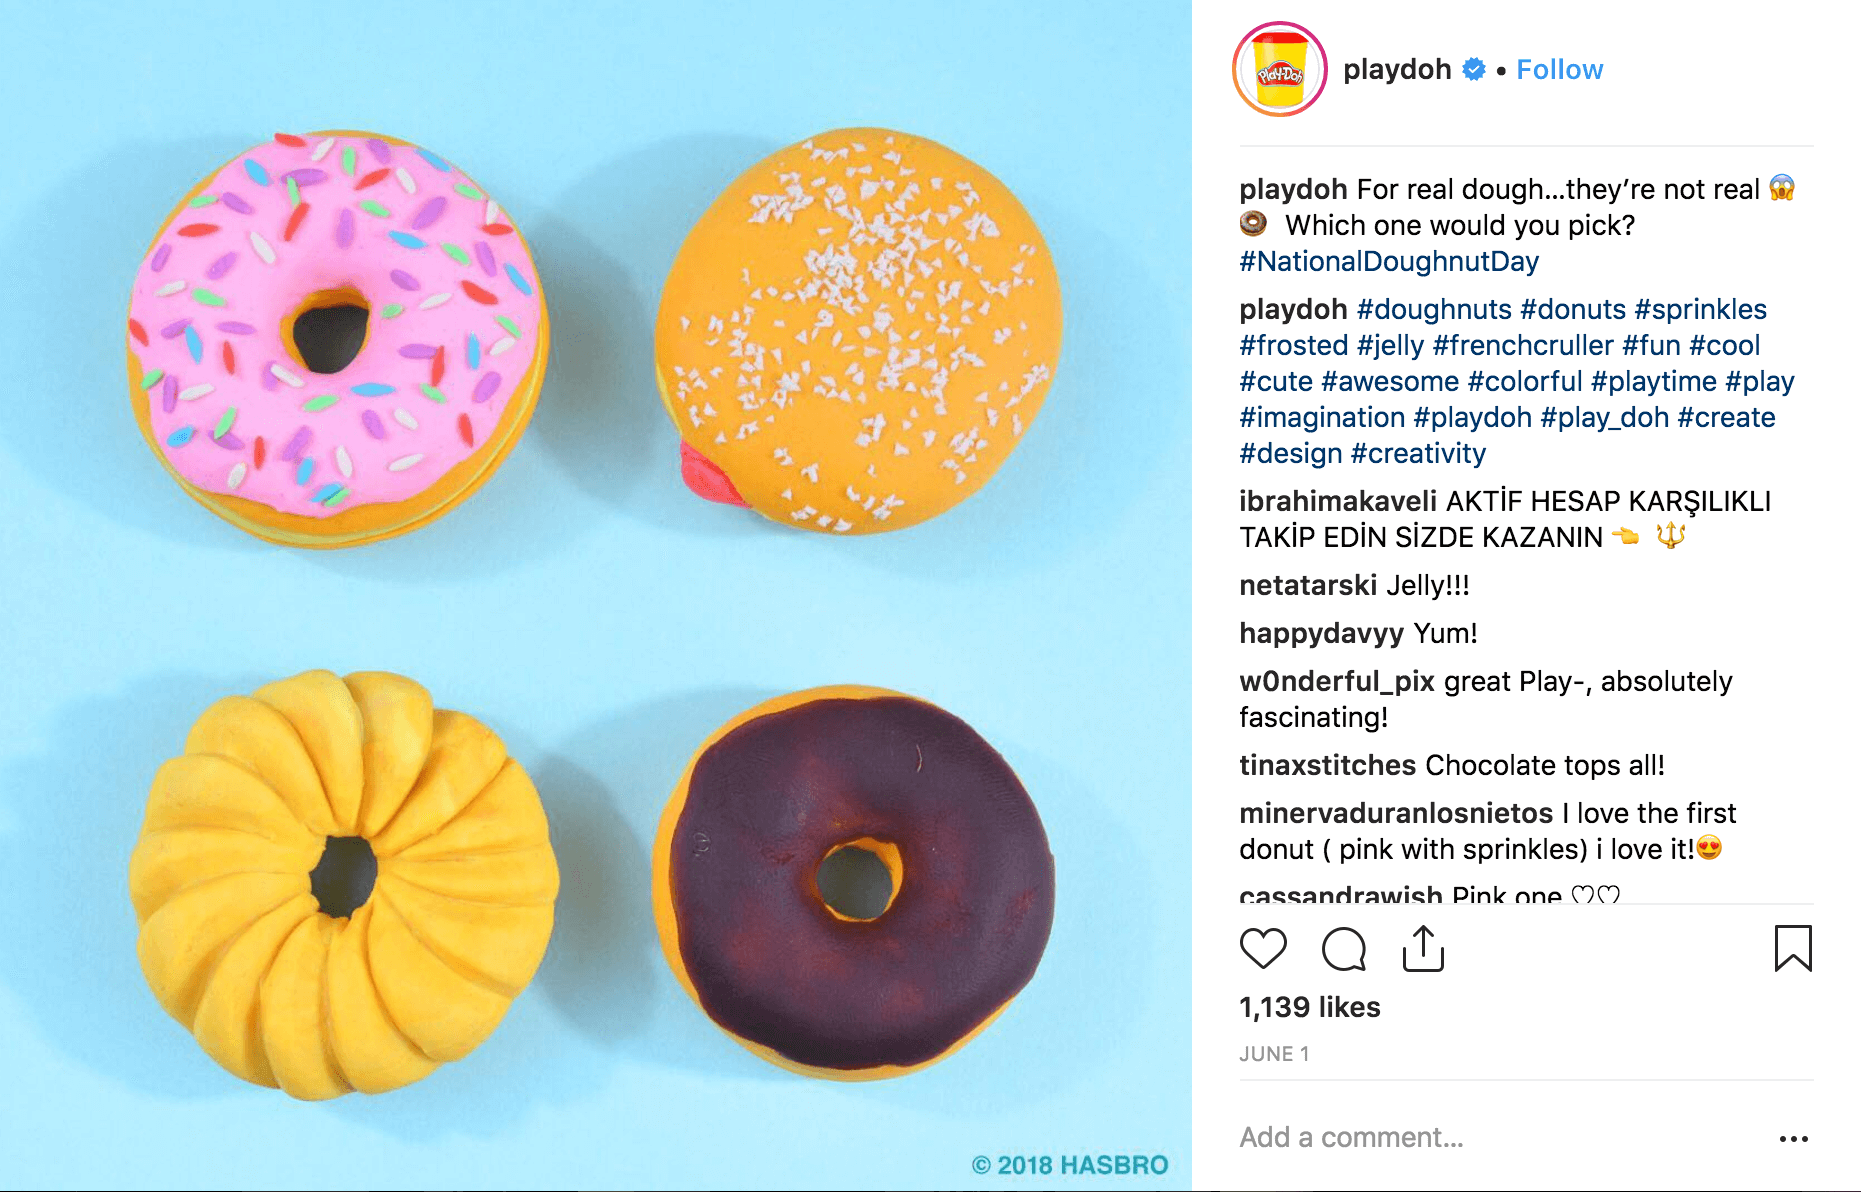 Play Doh on National Doughnut Day